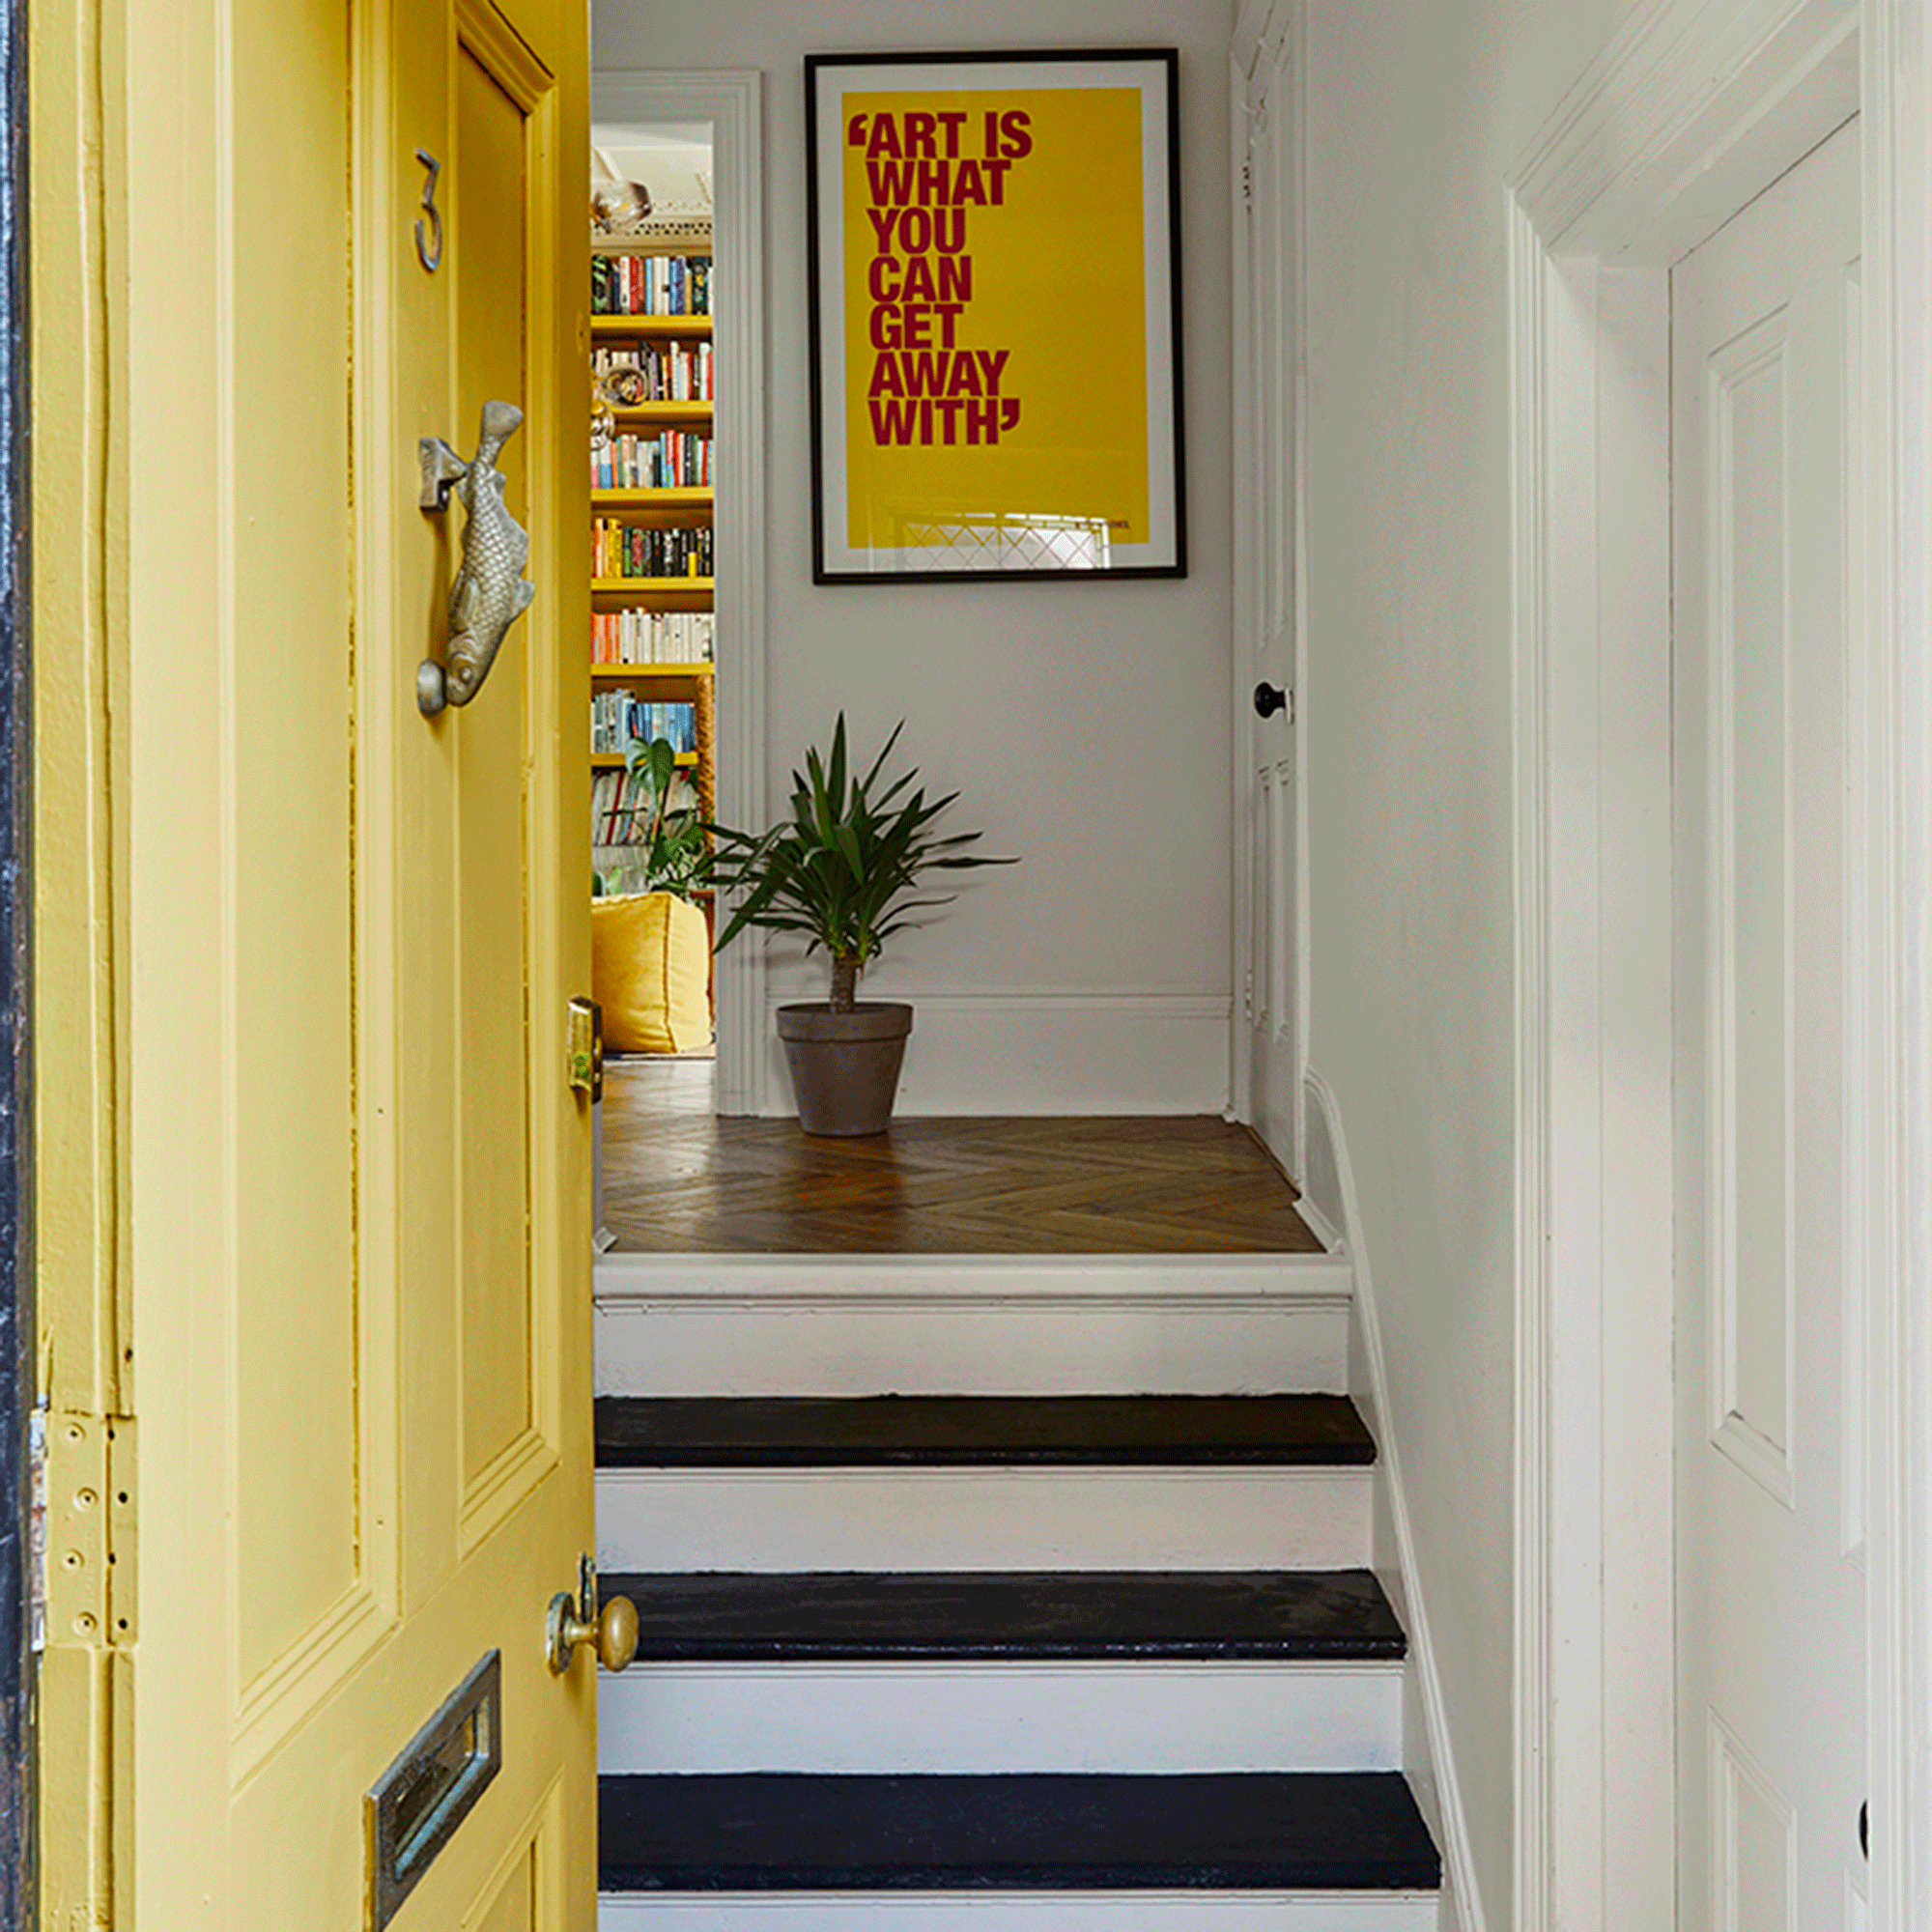 Trust us, these are the colours to avoid when painting a small hallway